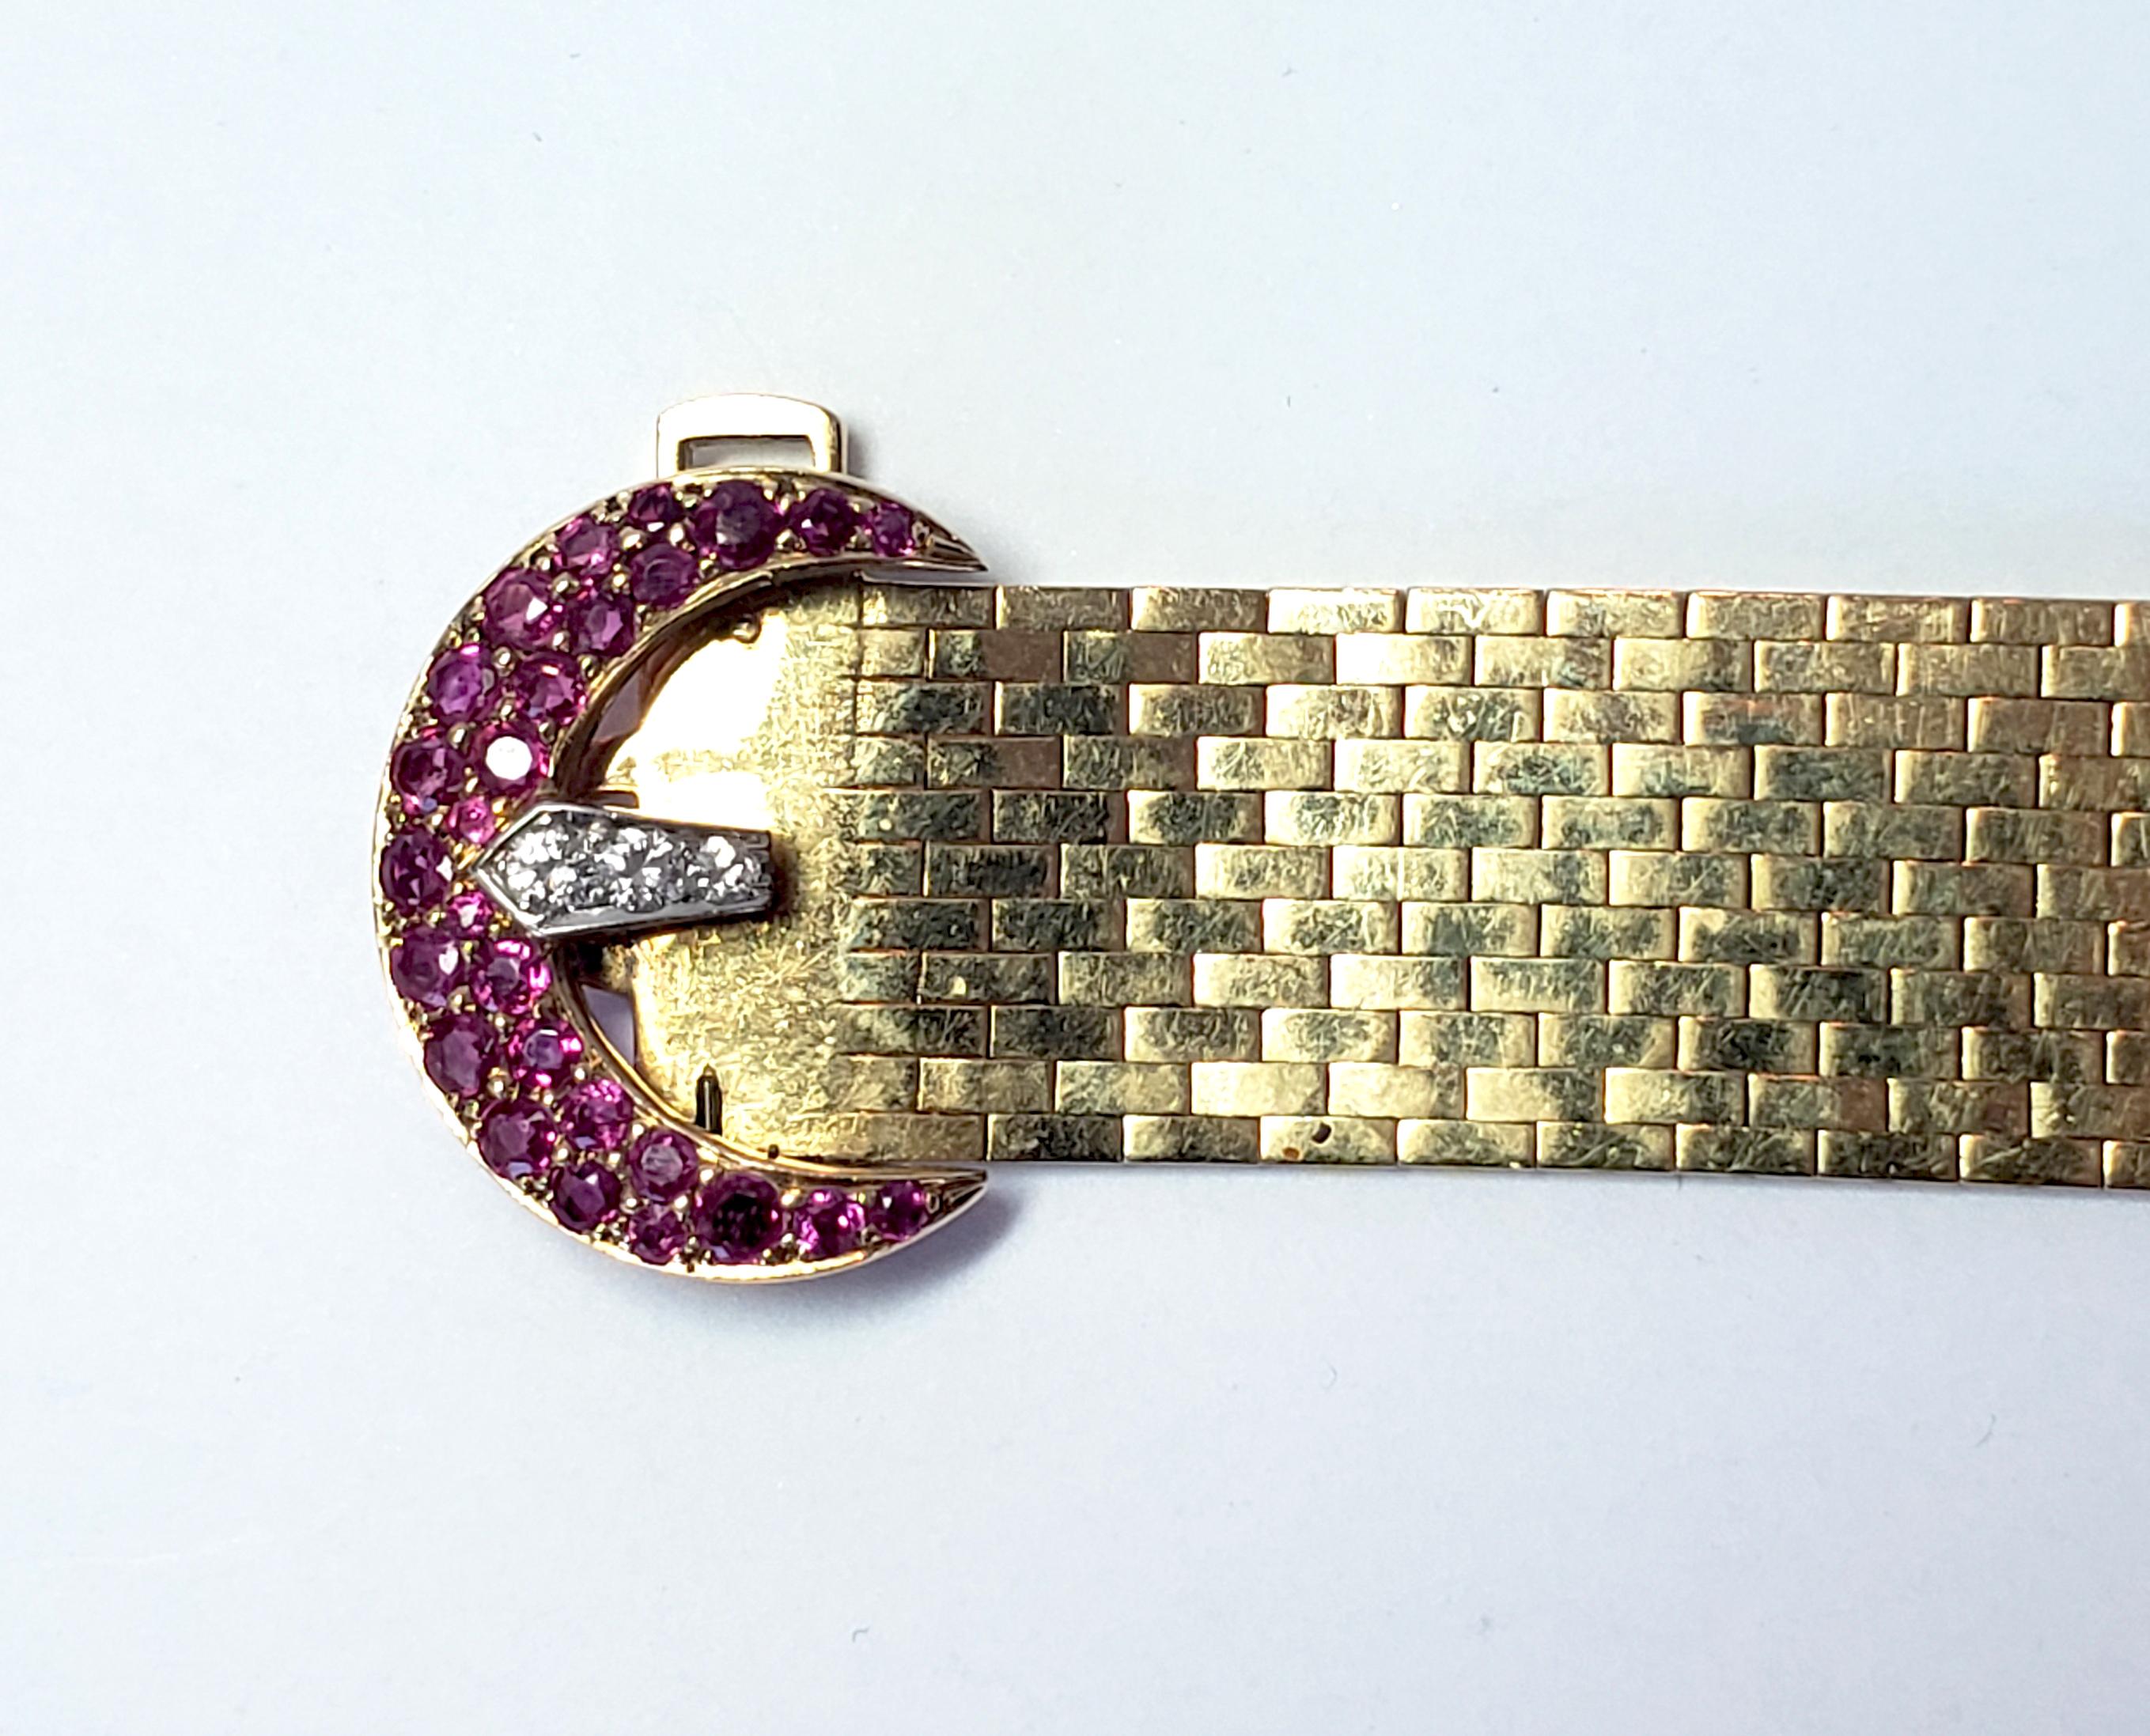 Beautiful Art Deco flexible band buckle 14 karat gold adjustable bracelet with diamonds and rubies on the buckle and end. Stamped 14K.
Circa 1930

Size:  L:  8”  W: 5/8”
Weight:  42.5 Grams